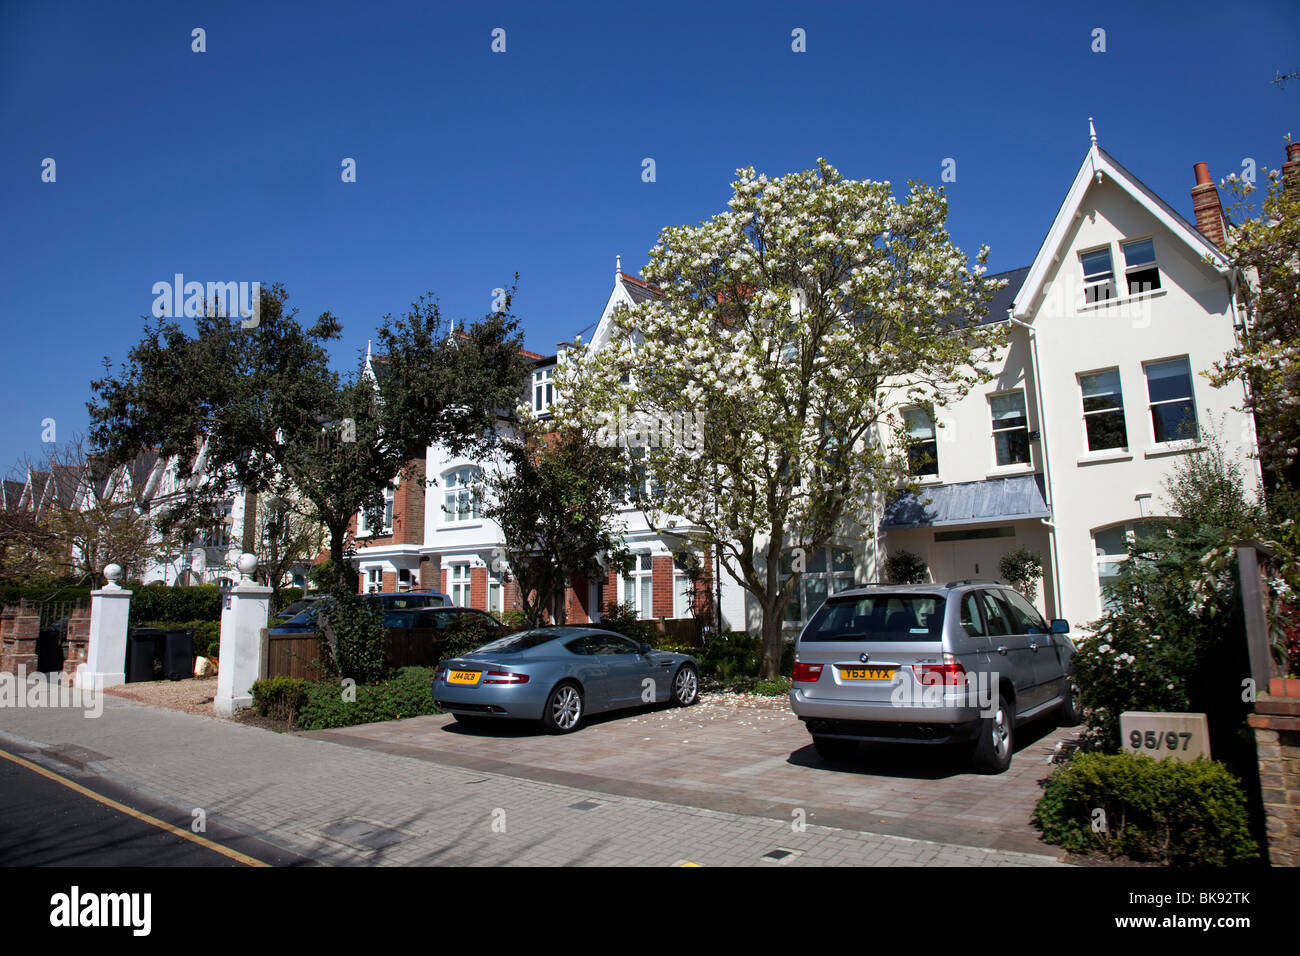 Residential street in Putney An affluent part of South West London. Stock Photo